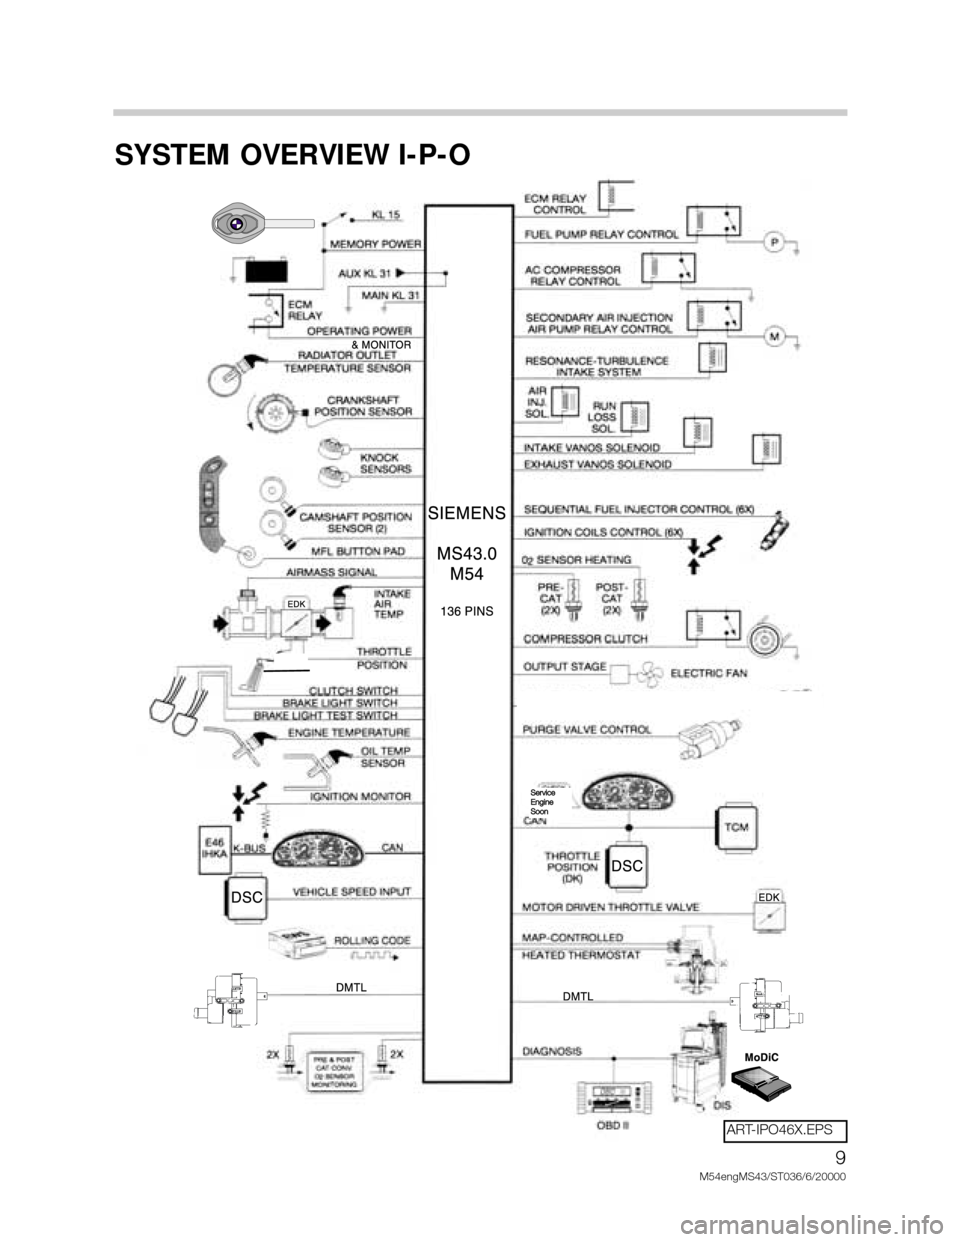 BMW X5 2004 E53 M54 Engine Workshop Manual 9
M54engMS43/ST036/6/20000
SYSTEM OVERVIEW I-P-O
Service 
Engine
Soon
ART-IPO46X.EPS 